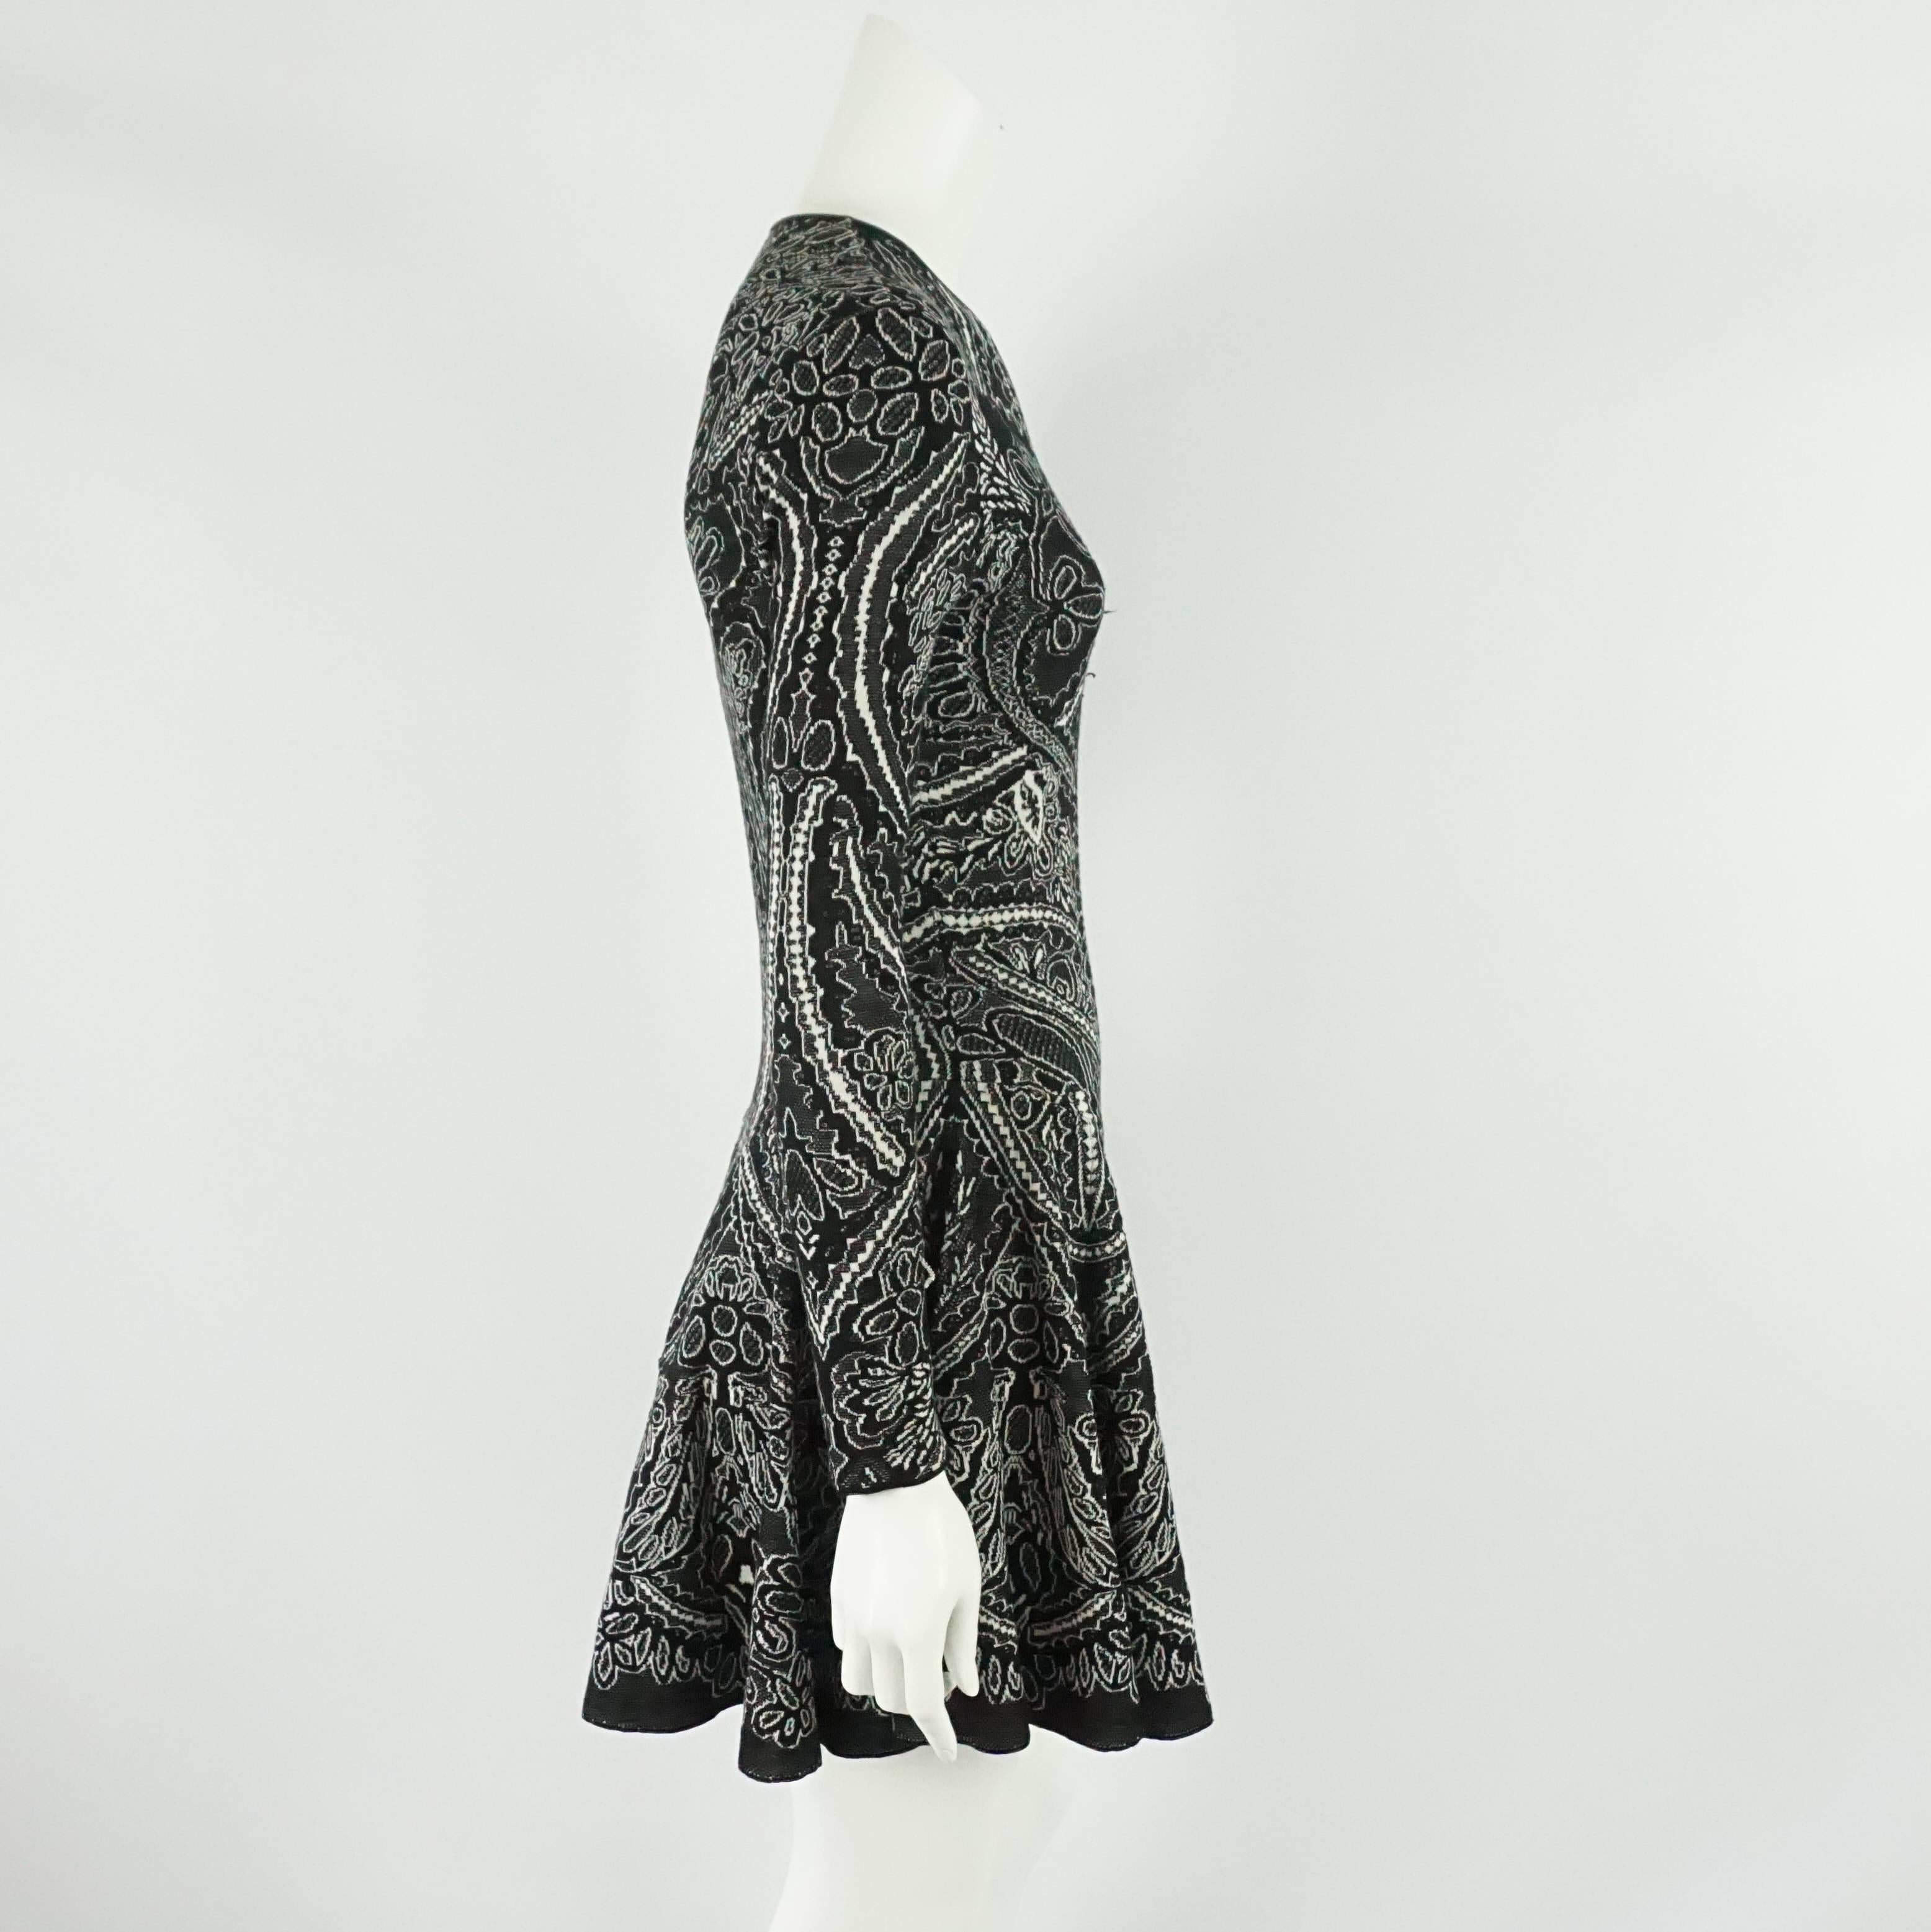 Alexander McQueen Black and Ivory Patterned Silk Knit Dress - Small  This long sleeve, round collar silk/wool blend knit dress is fitted to the waist and then the skirt flares out. The dress is in excellent condition.
Measurements:
Bust: